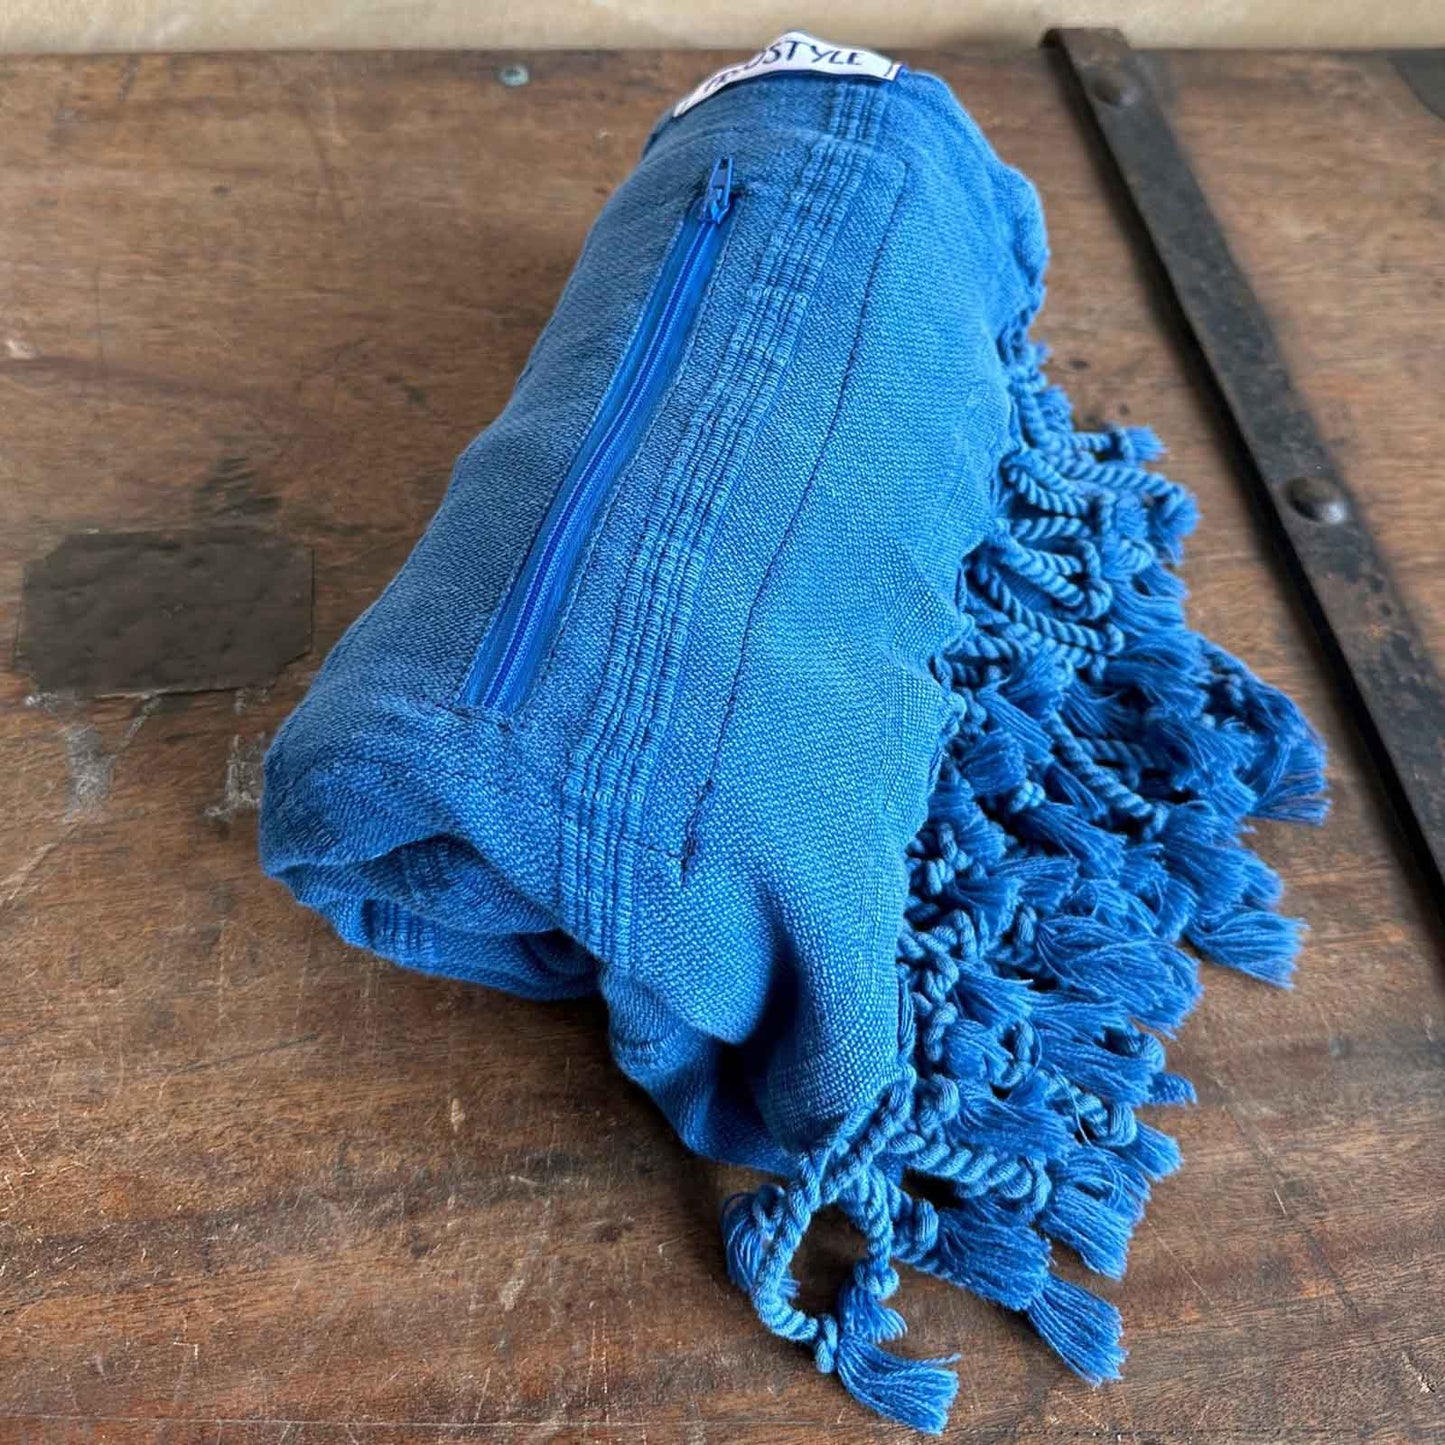 Blue Monday Turkish Towel with Pockets, rolled, by Freostyle